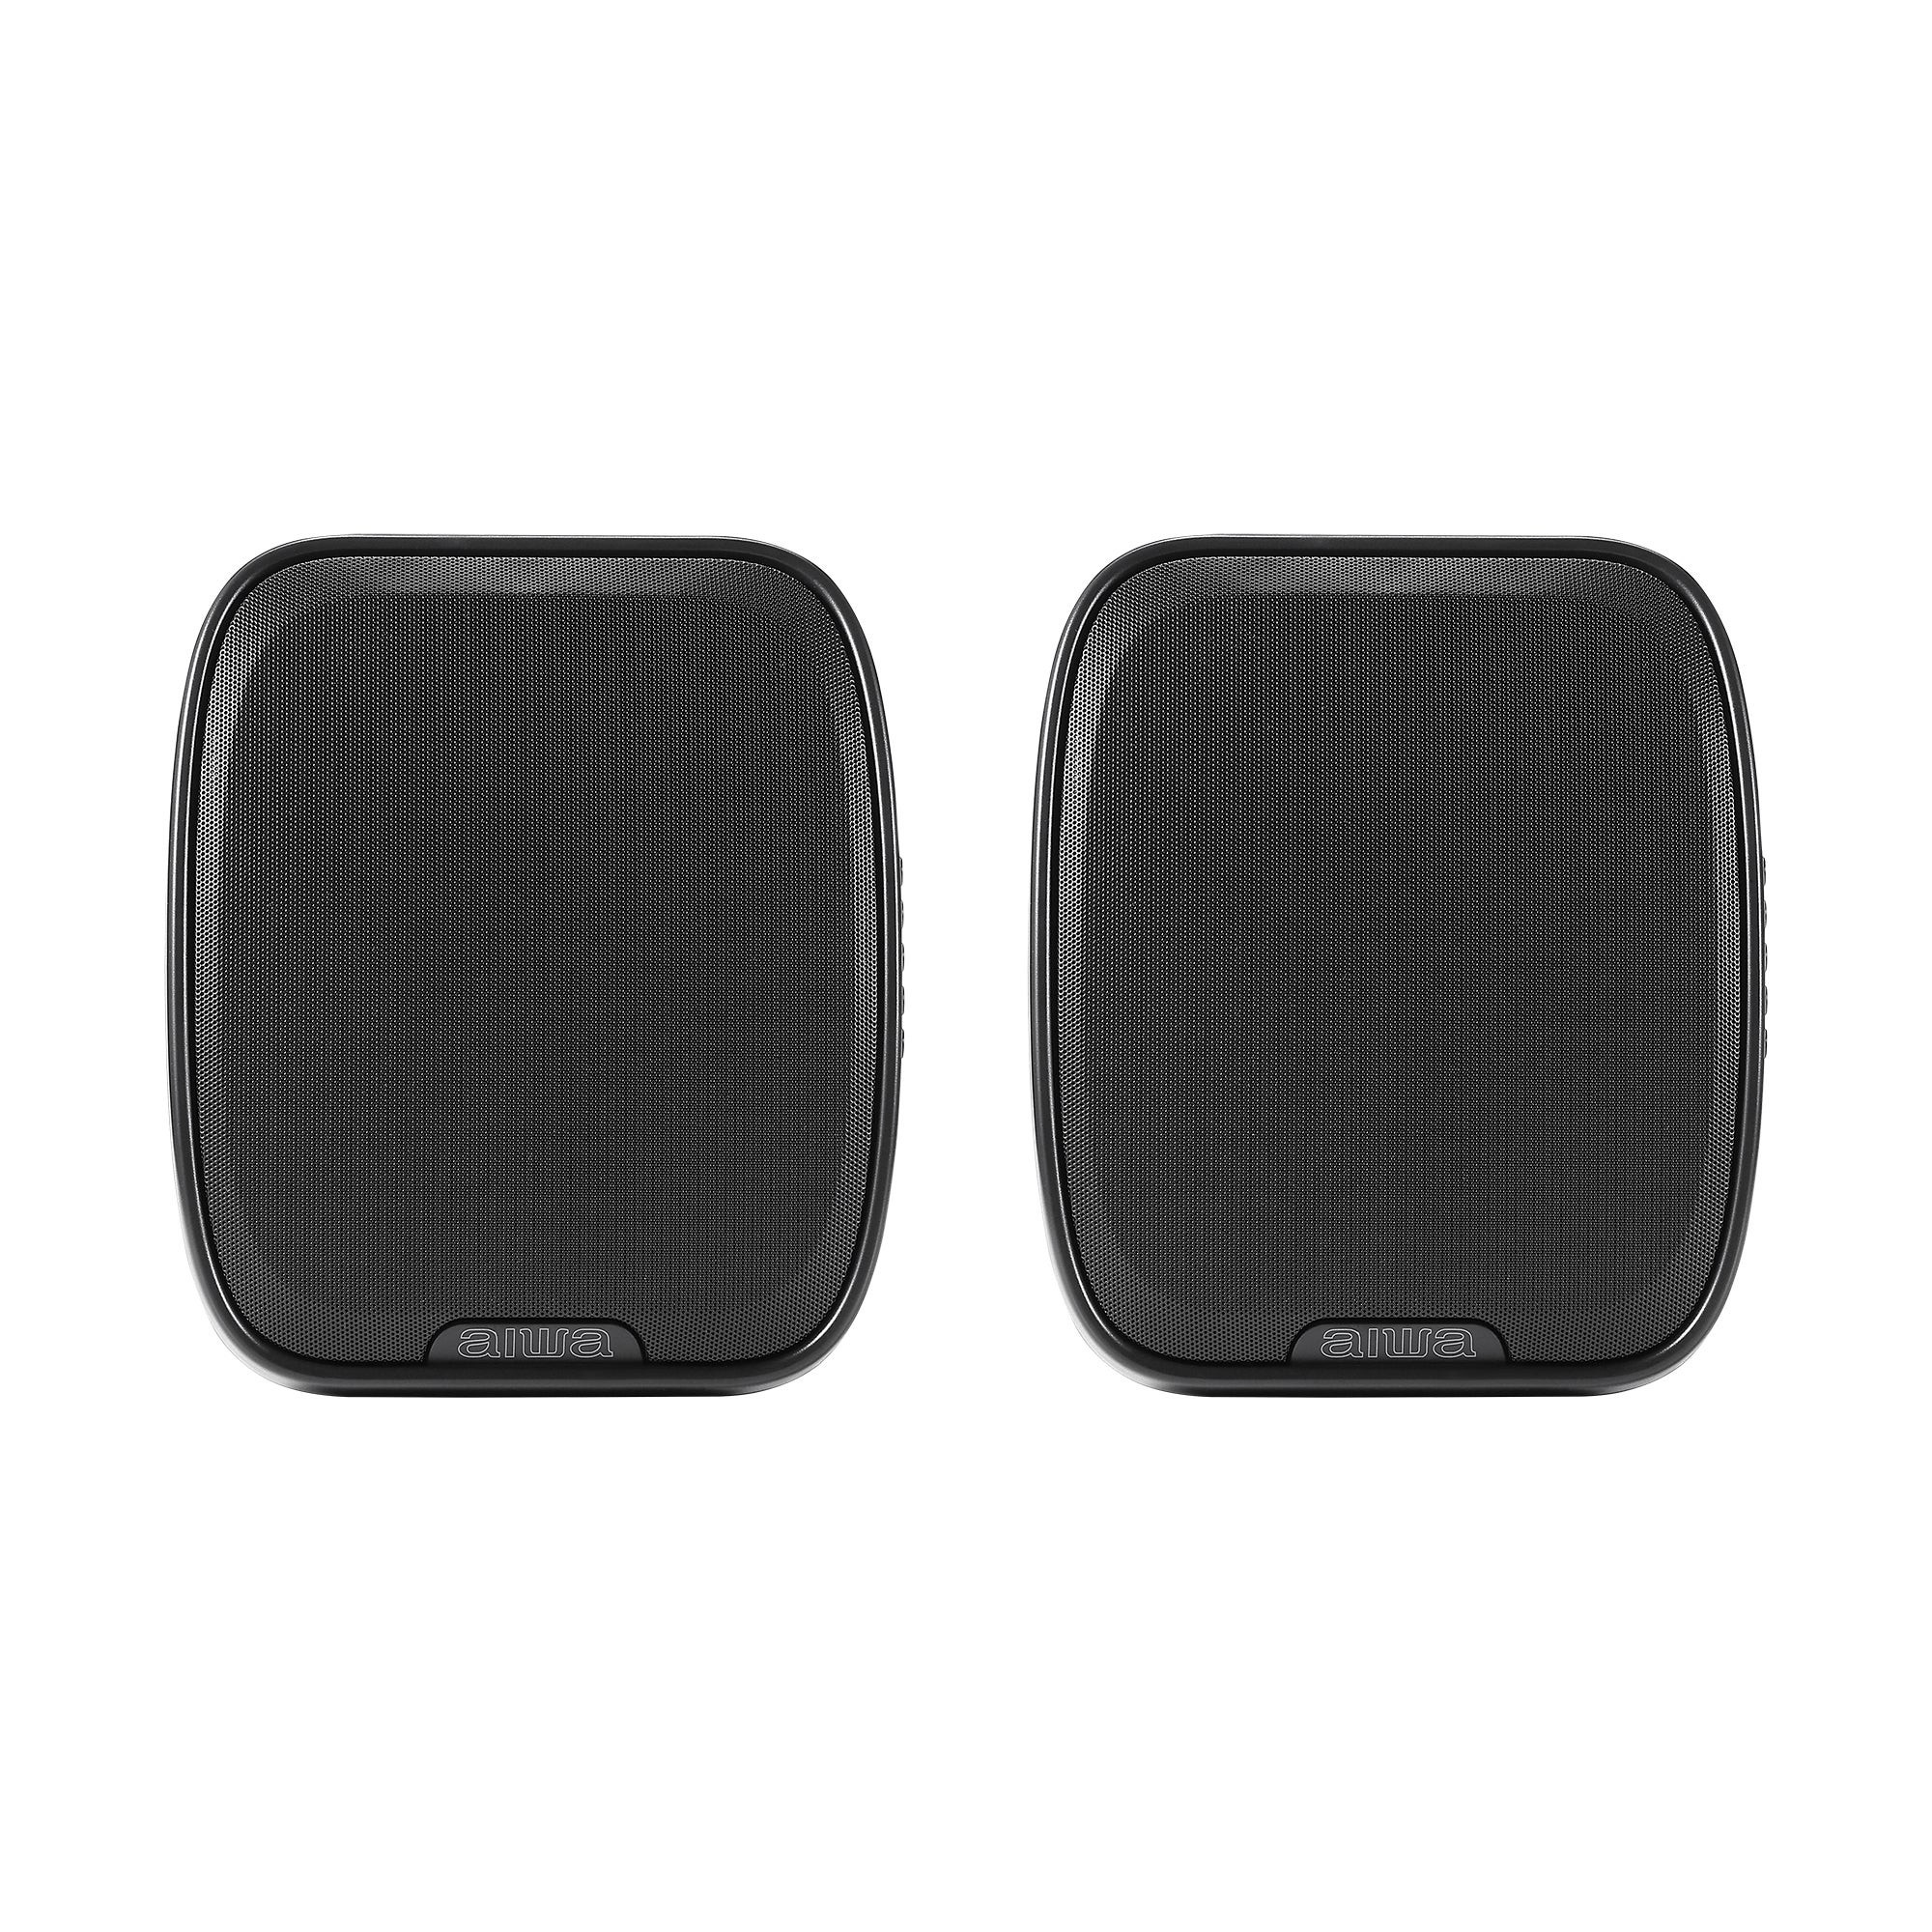 Dual Wireless Wall Mounted Speaker Pair w/ Rechargeable Battery